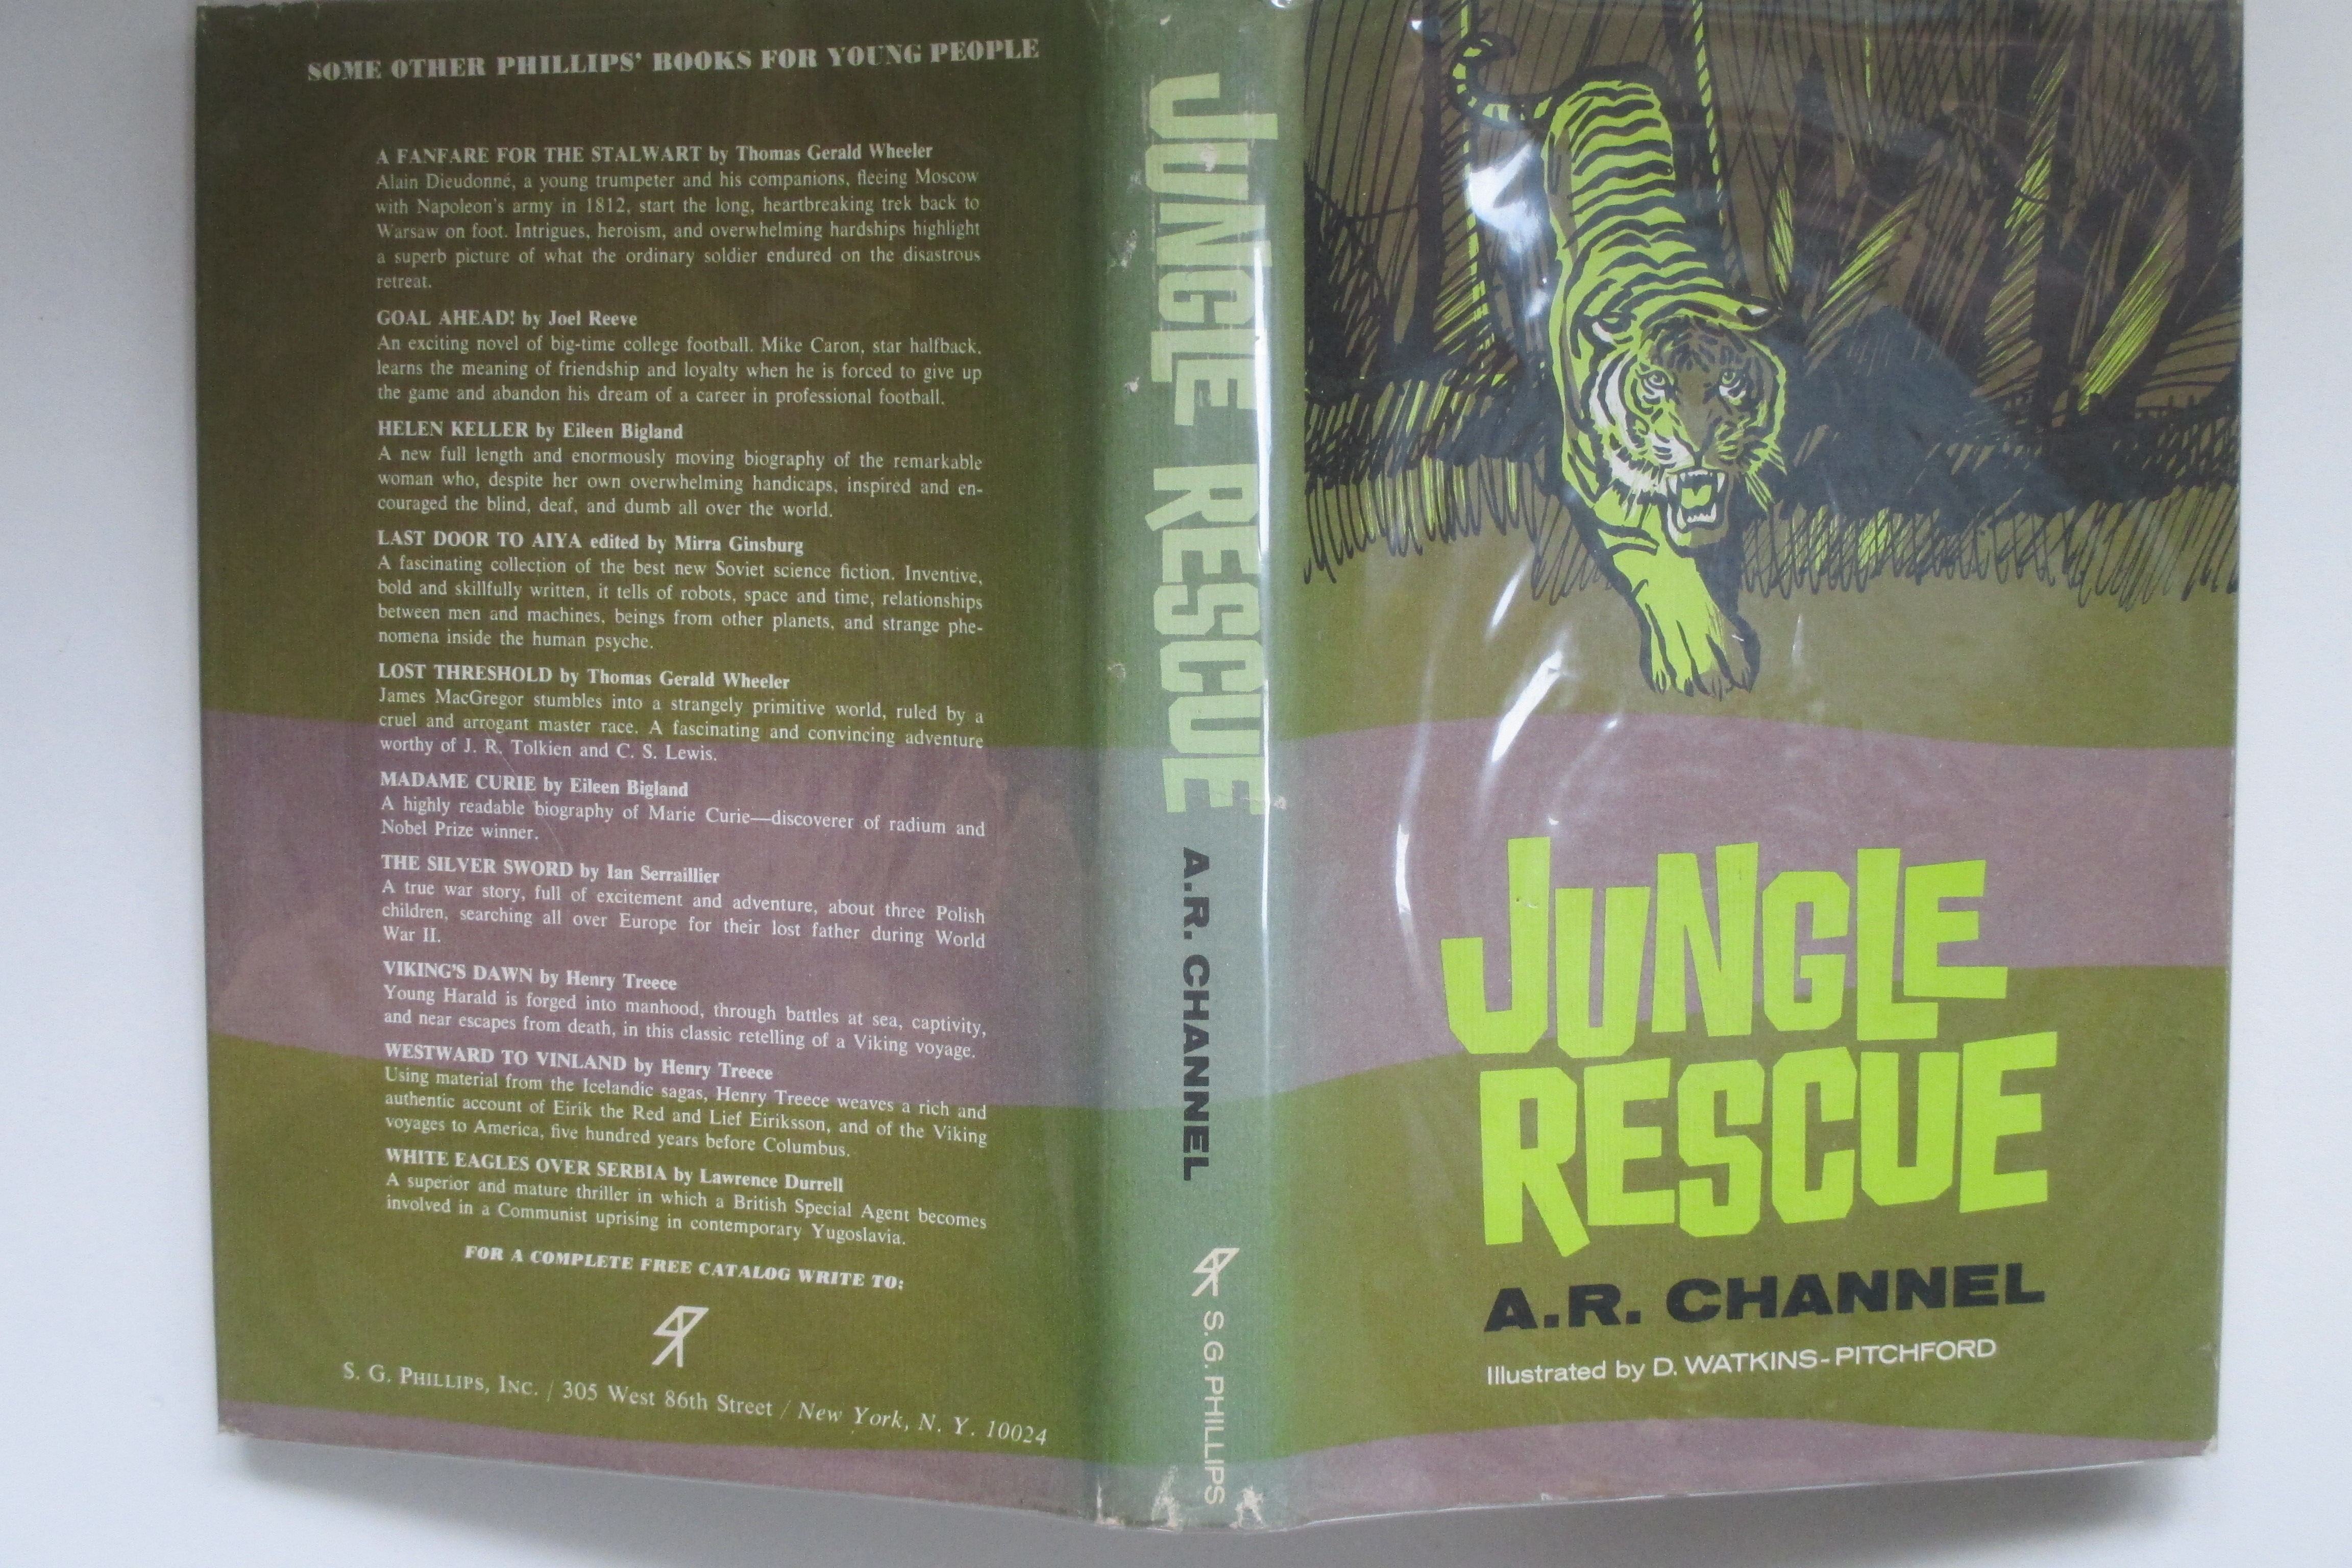 Aucott　Thomas　(1968)　Fair　American　Channel,　First　rescue　Hardcover　by　Jungle　Edition.